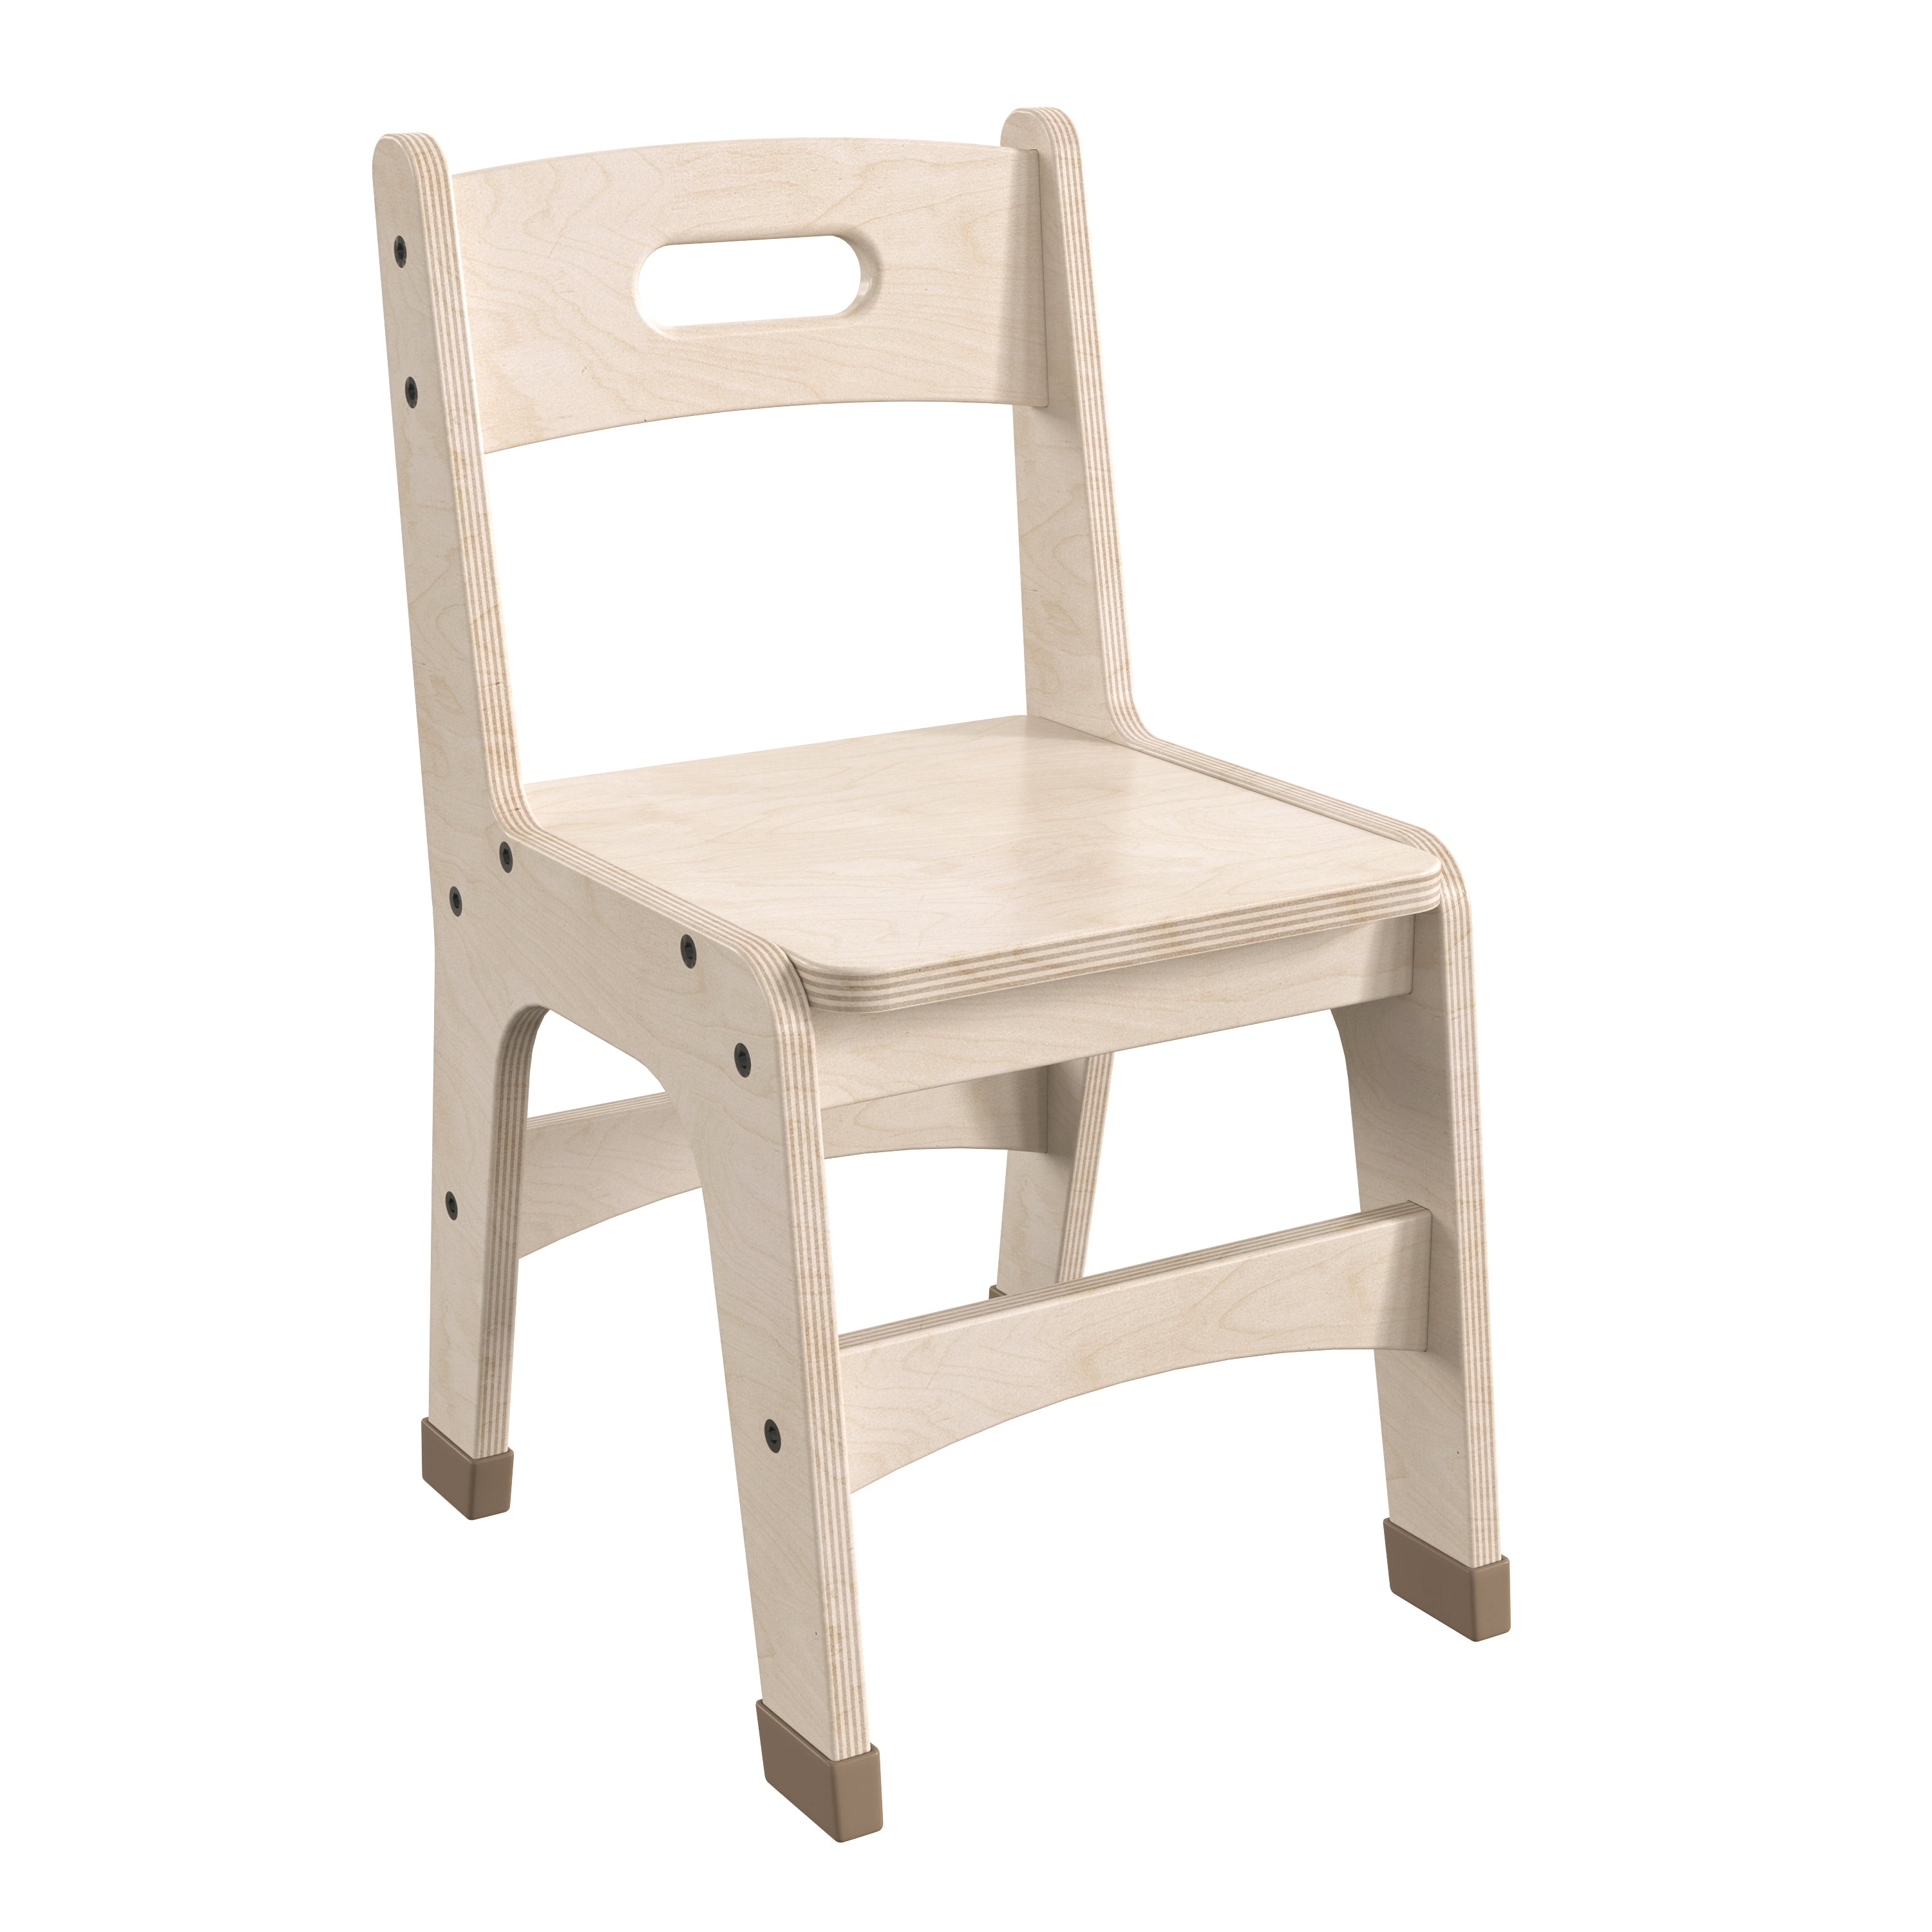 Bright Beginnings Set of 2 Commercial Grade Wooden Classroom Chairs with Non-Slip Foot Caps and Built-In Carrying Handle-Classroom Chair-Flash Furniture-Wall2Wall Furnishings